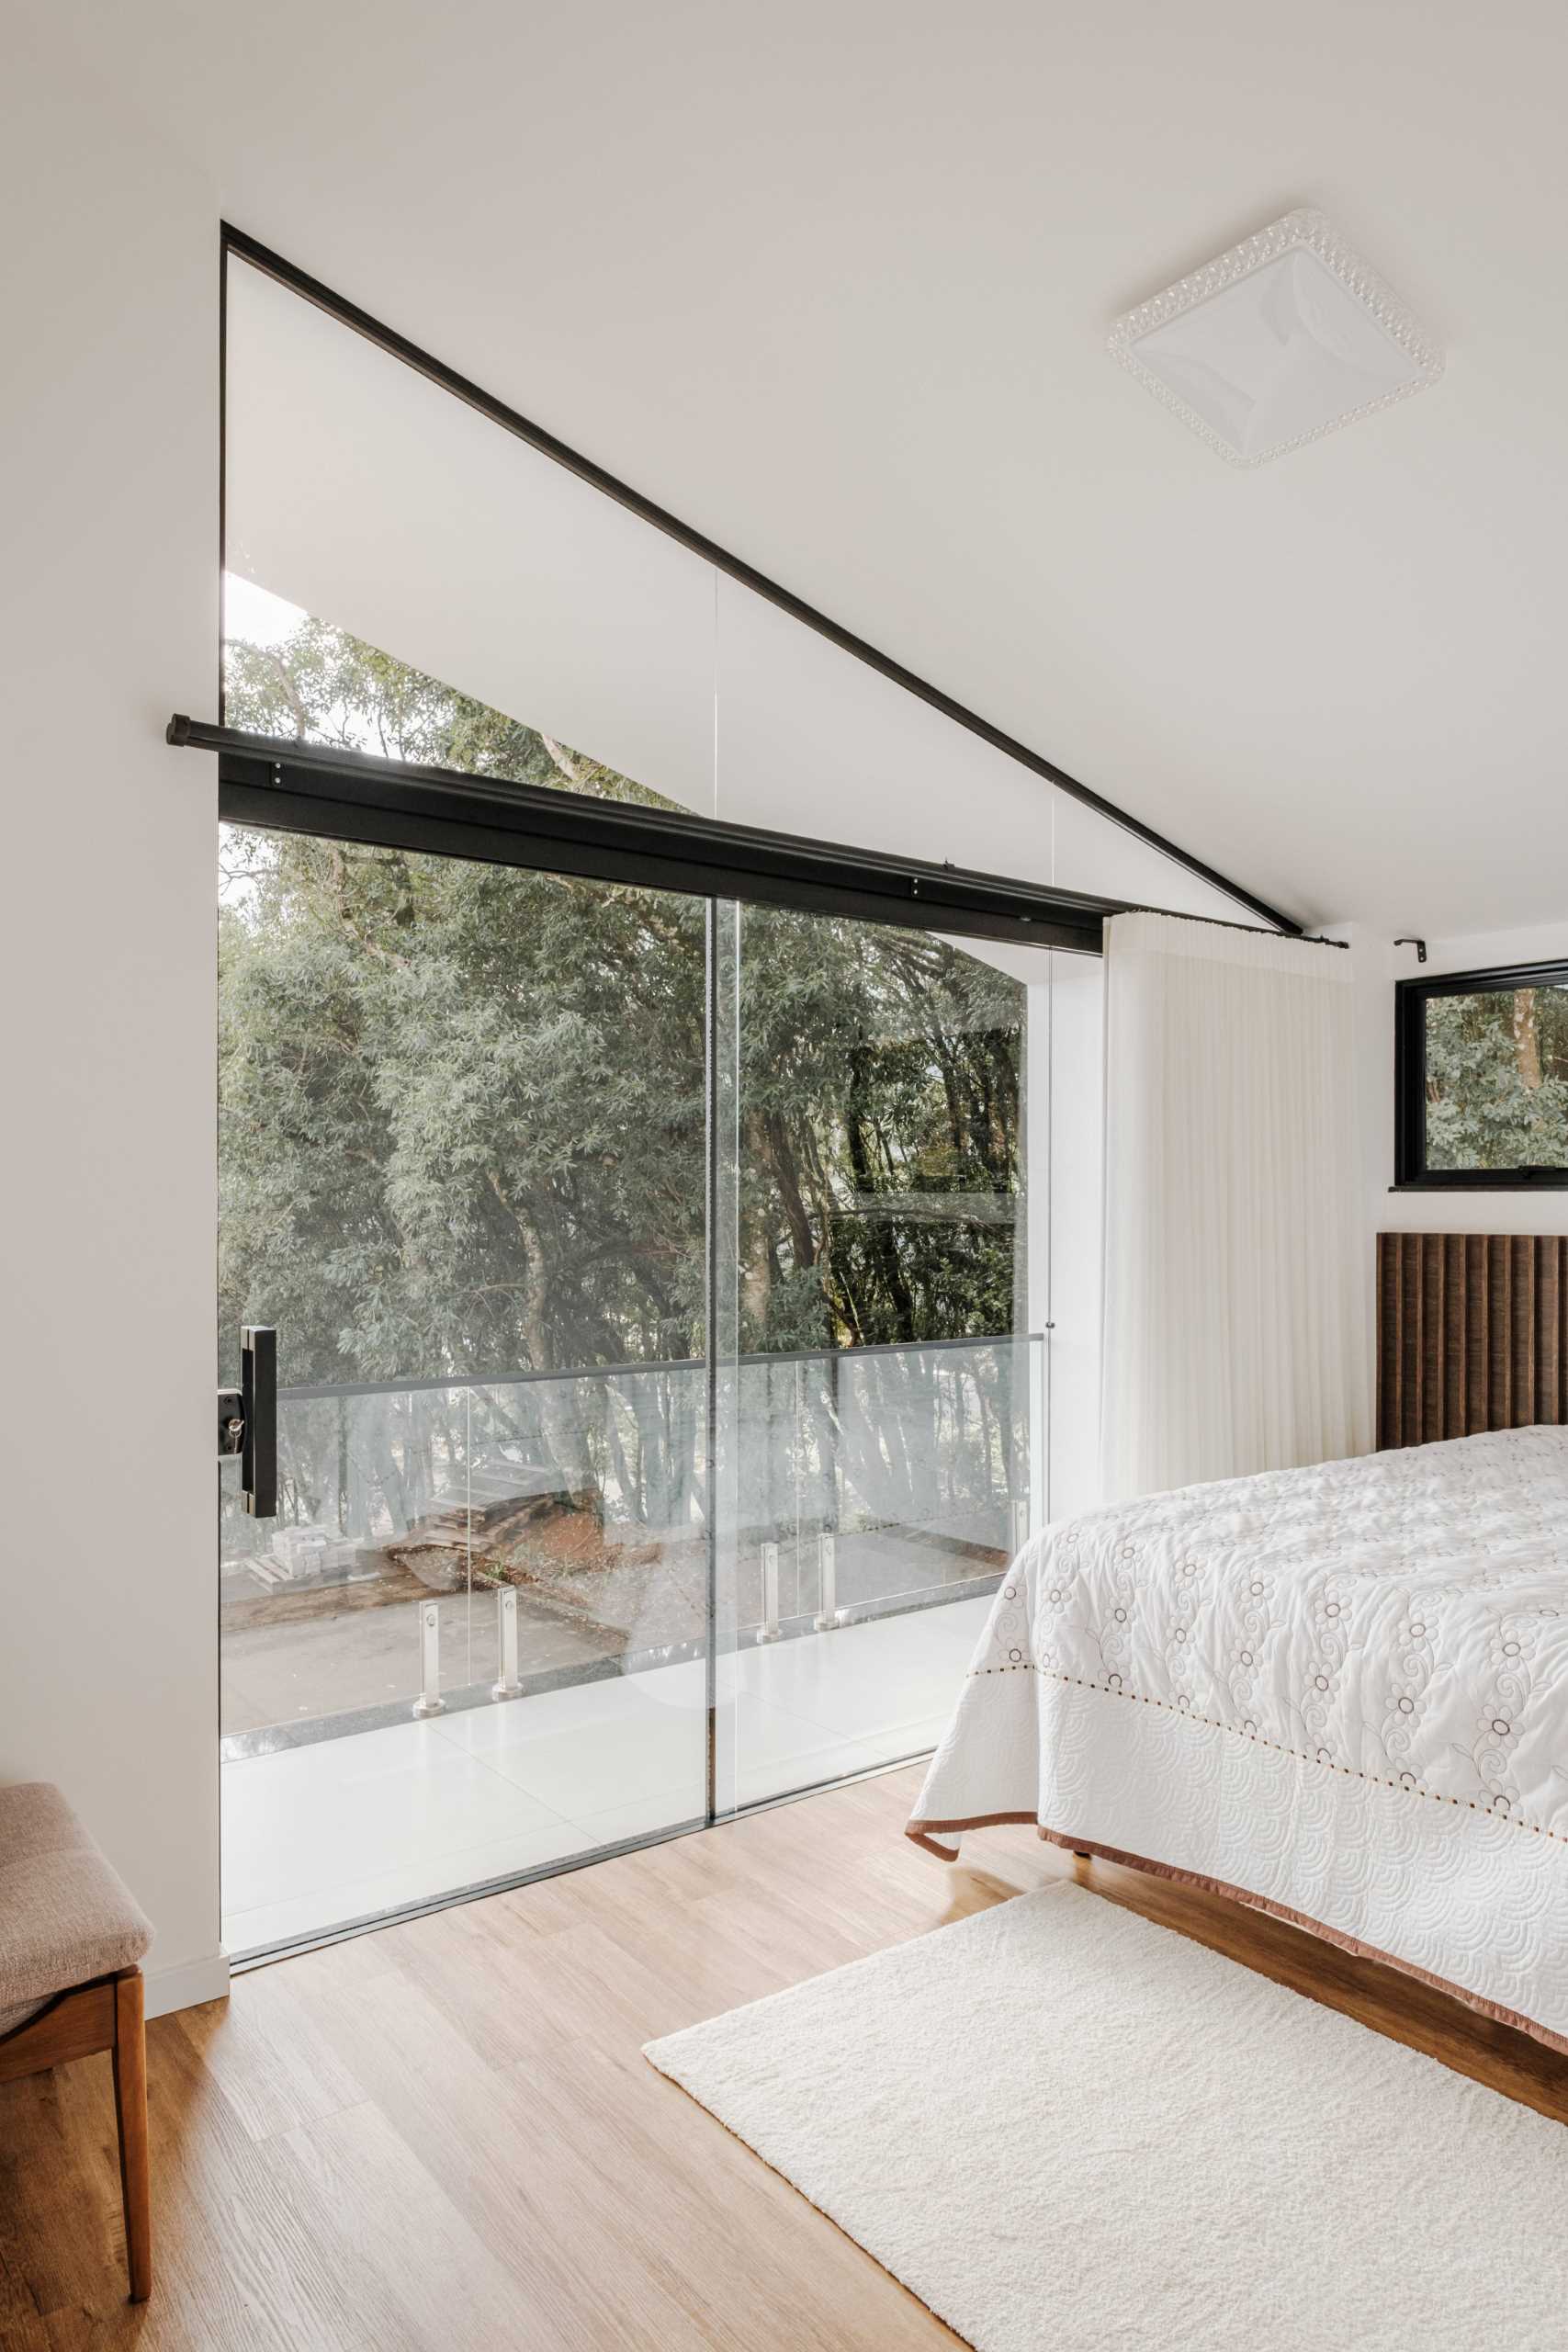 In this modern bedroom, the window follows the angled roofline, and a sliding door connects the ،e with the balcony.